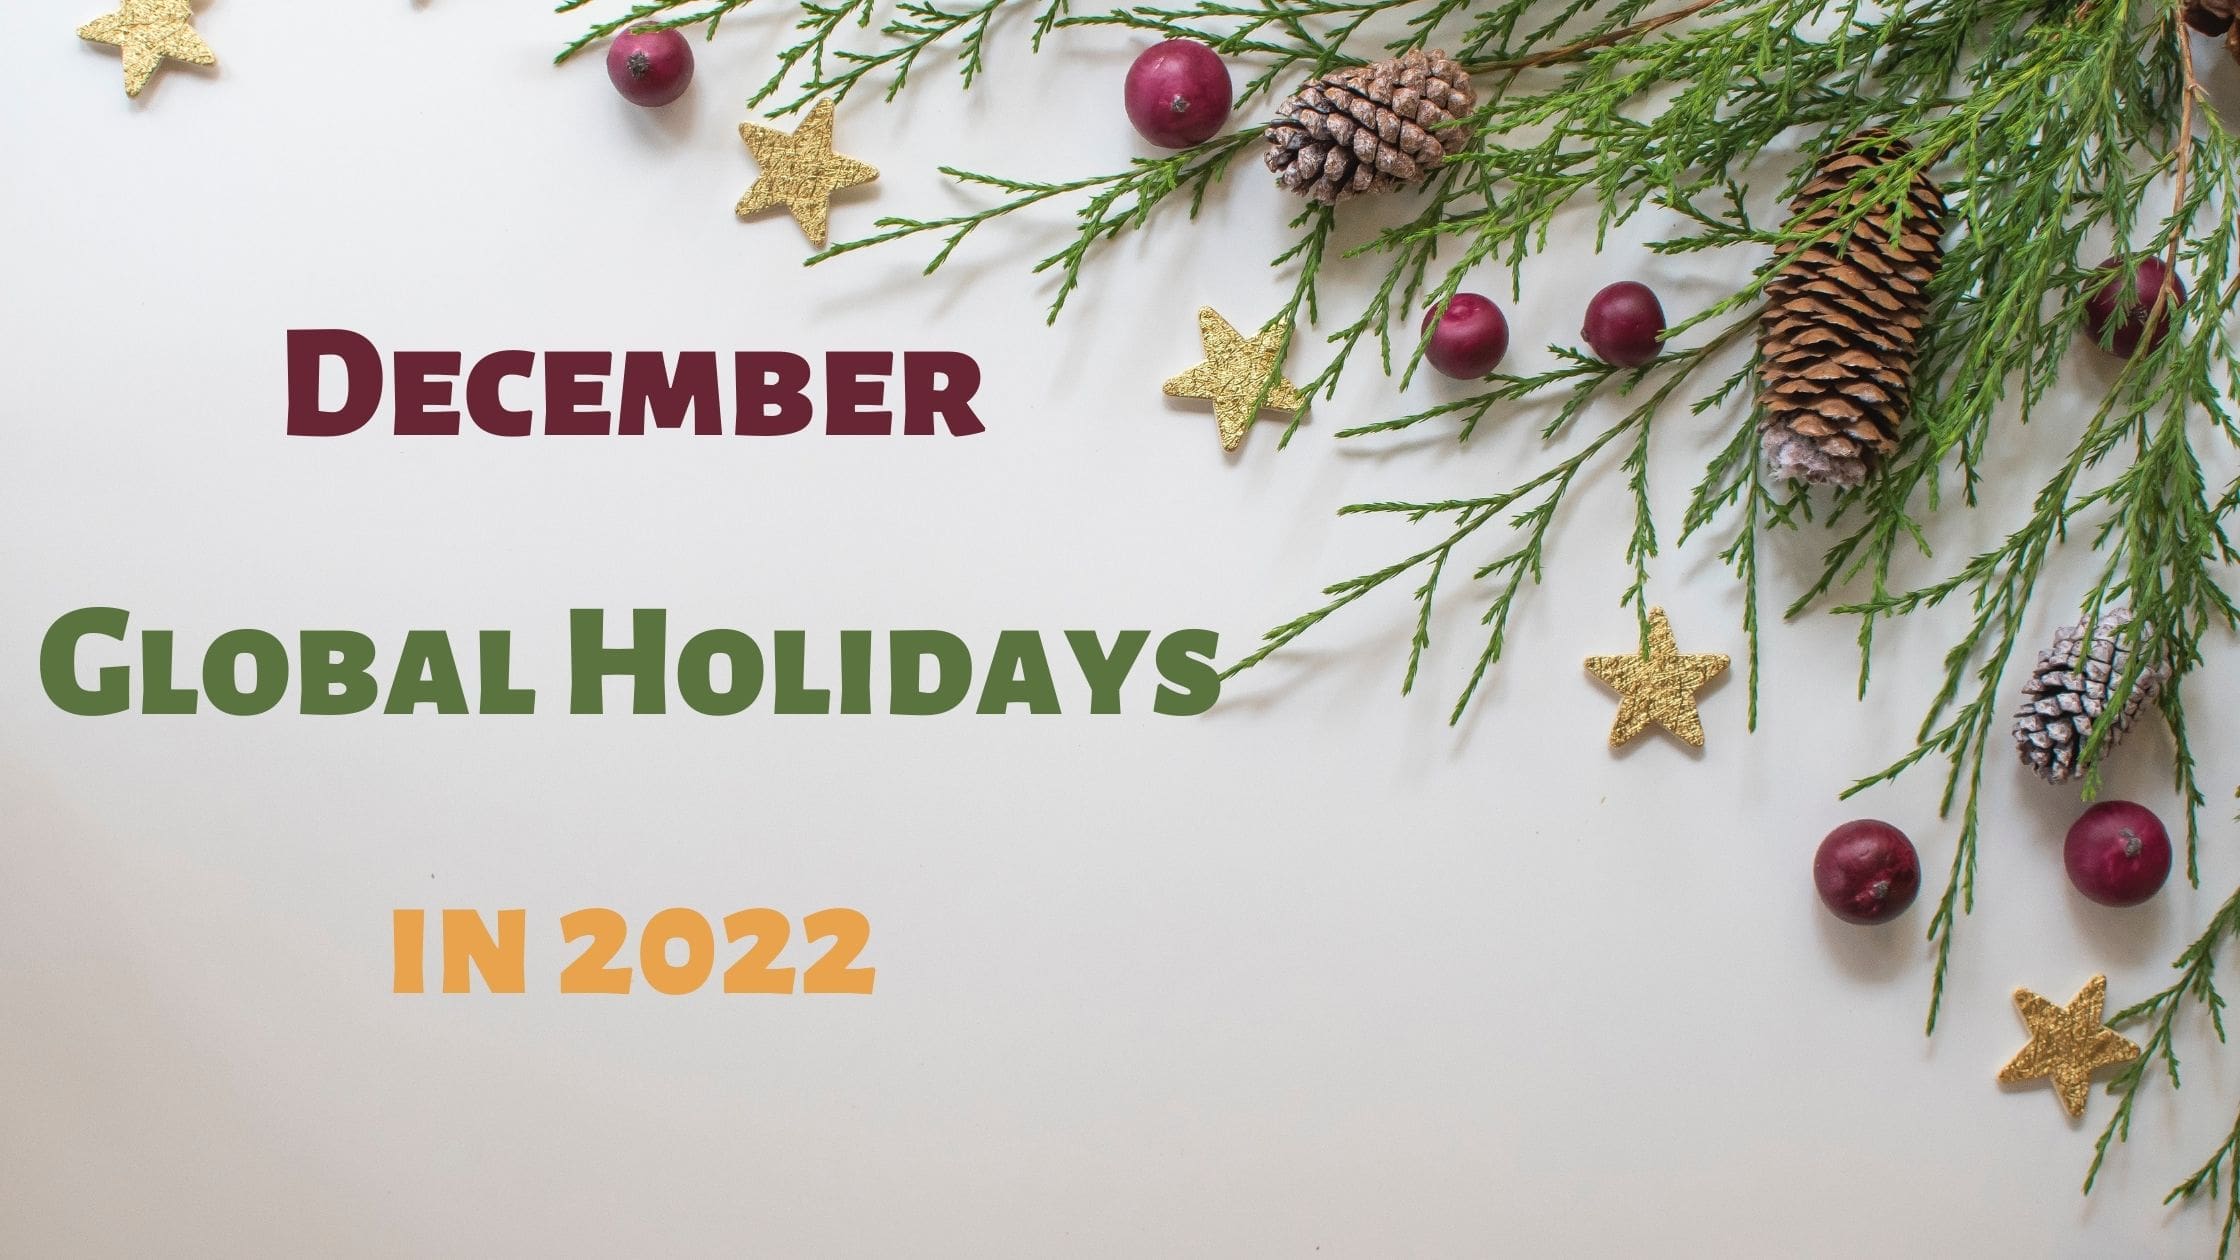 December Global Holidays in 2022: Check the Complete List